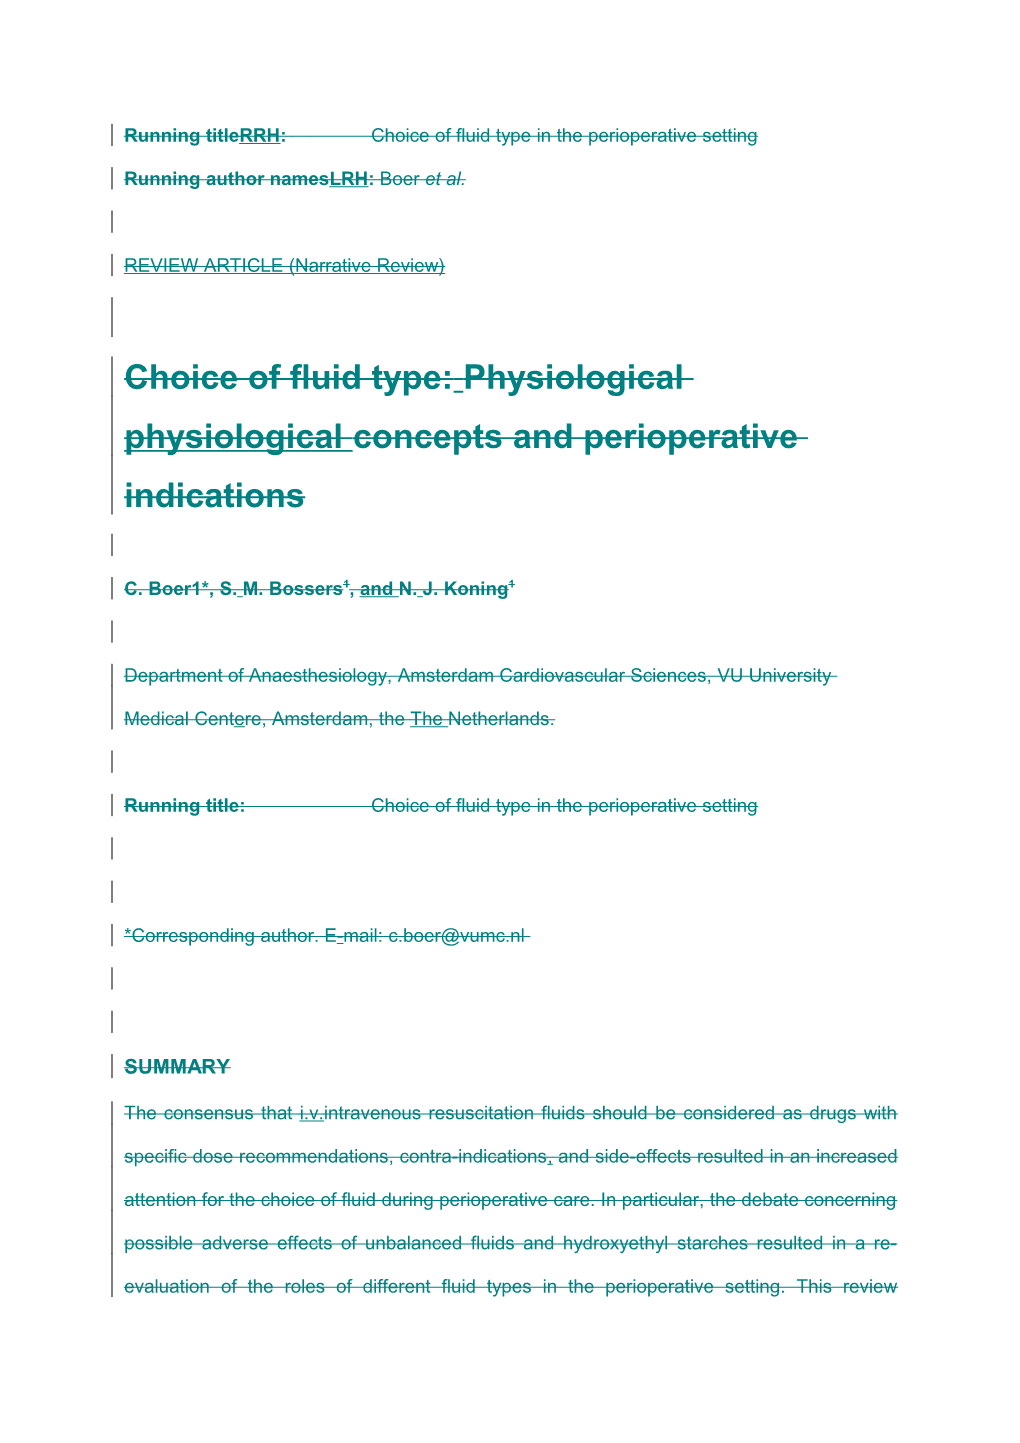 Running Titlerrh: Choice of Fluid Type in the Perioperative Setting